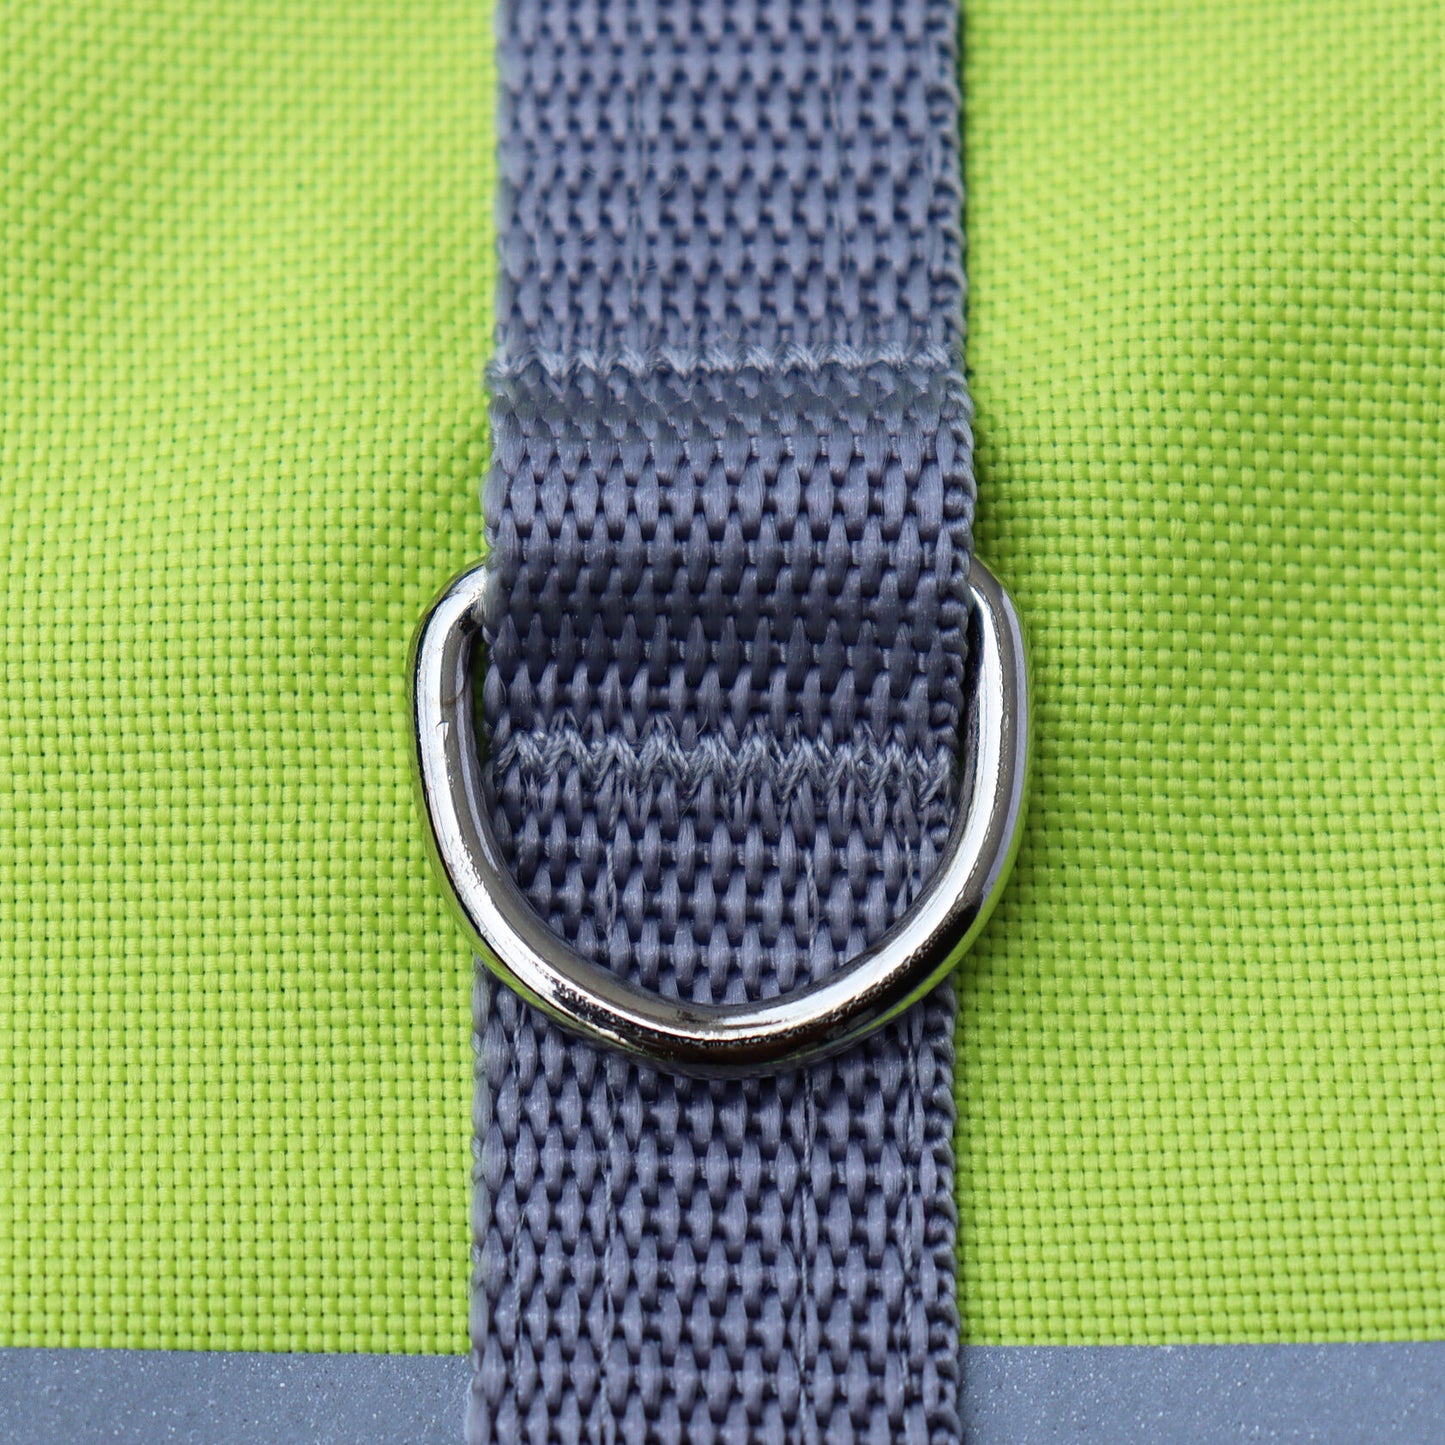 Difficult to escape water-repellent safety cat harness with reflective stripes. Light green